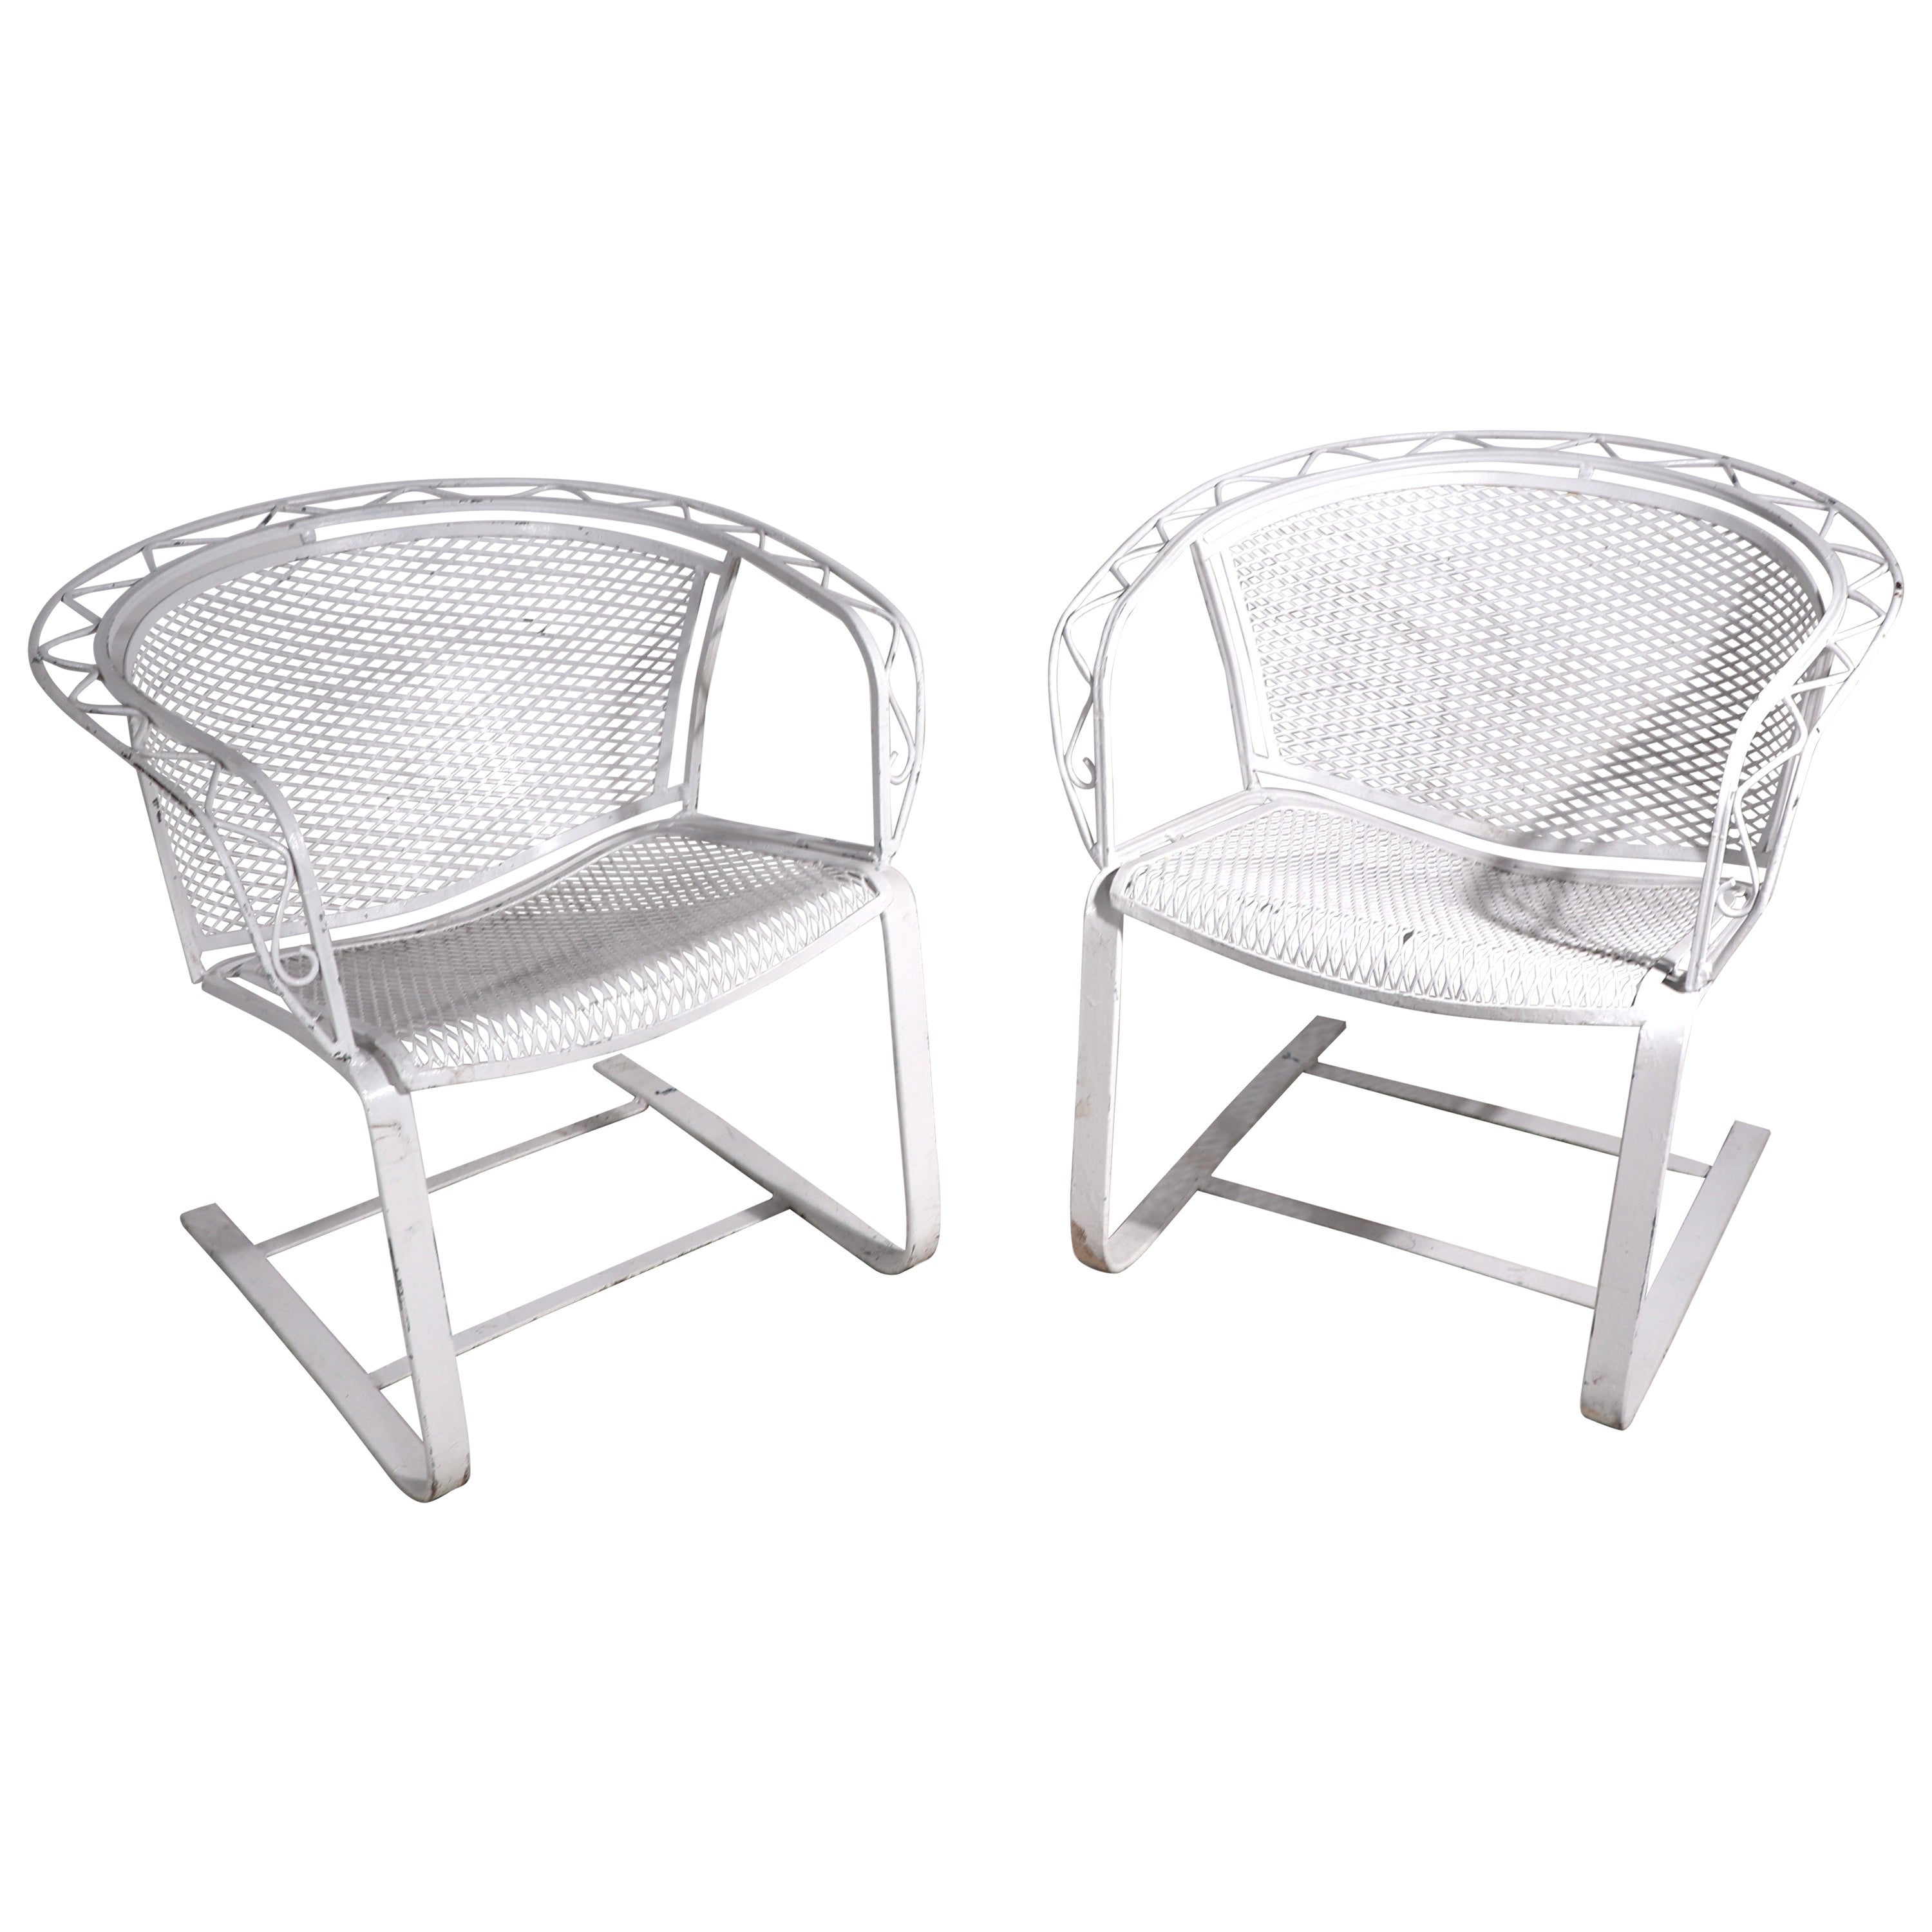 Pr Cantilevered Garden Patio Poolside Chairs by Salterini 